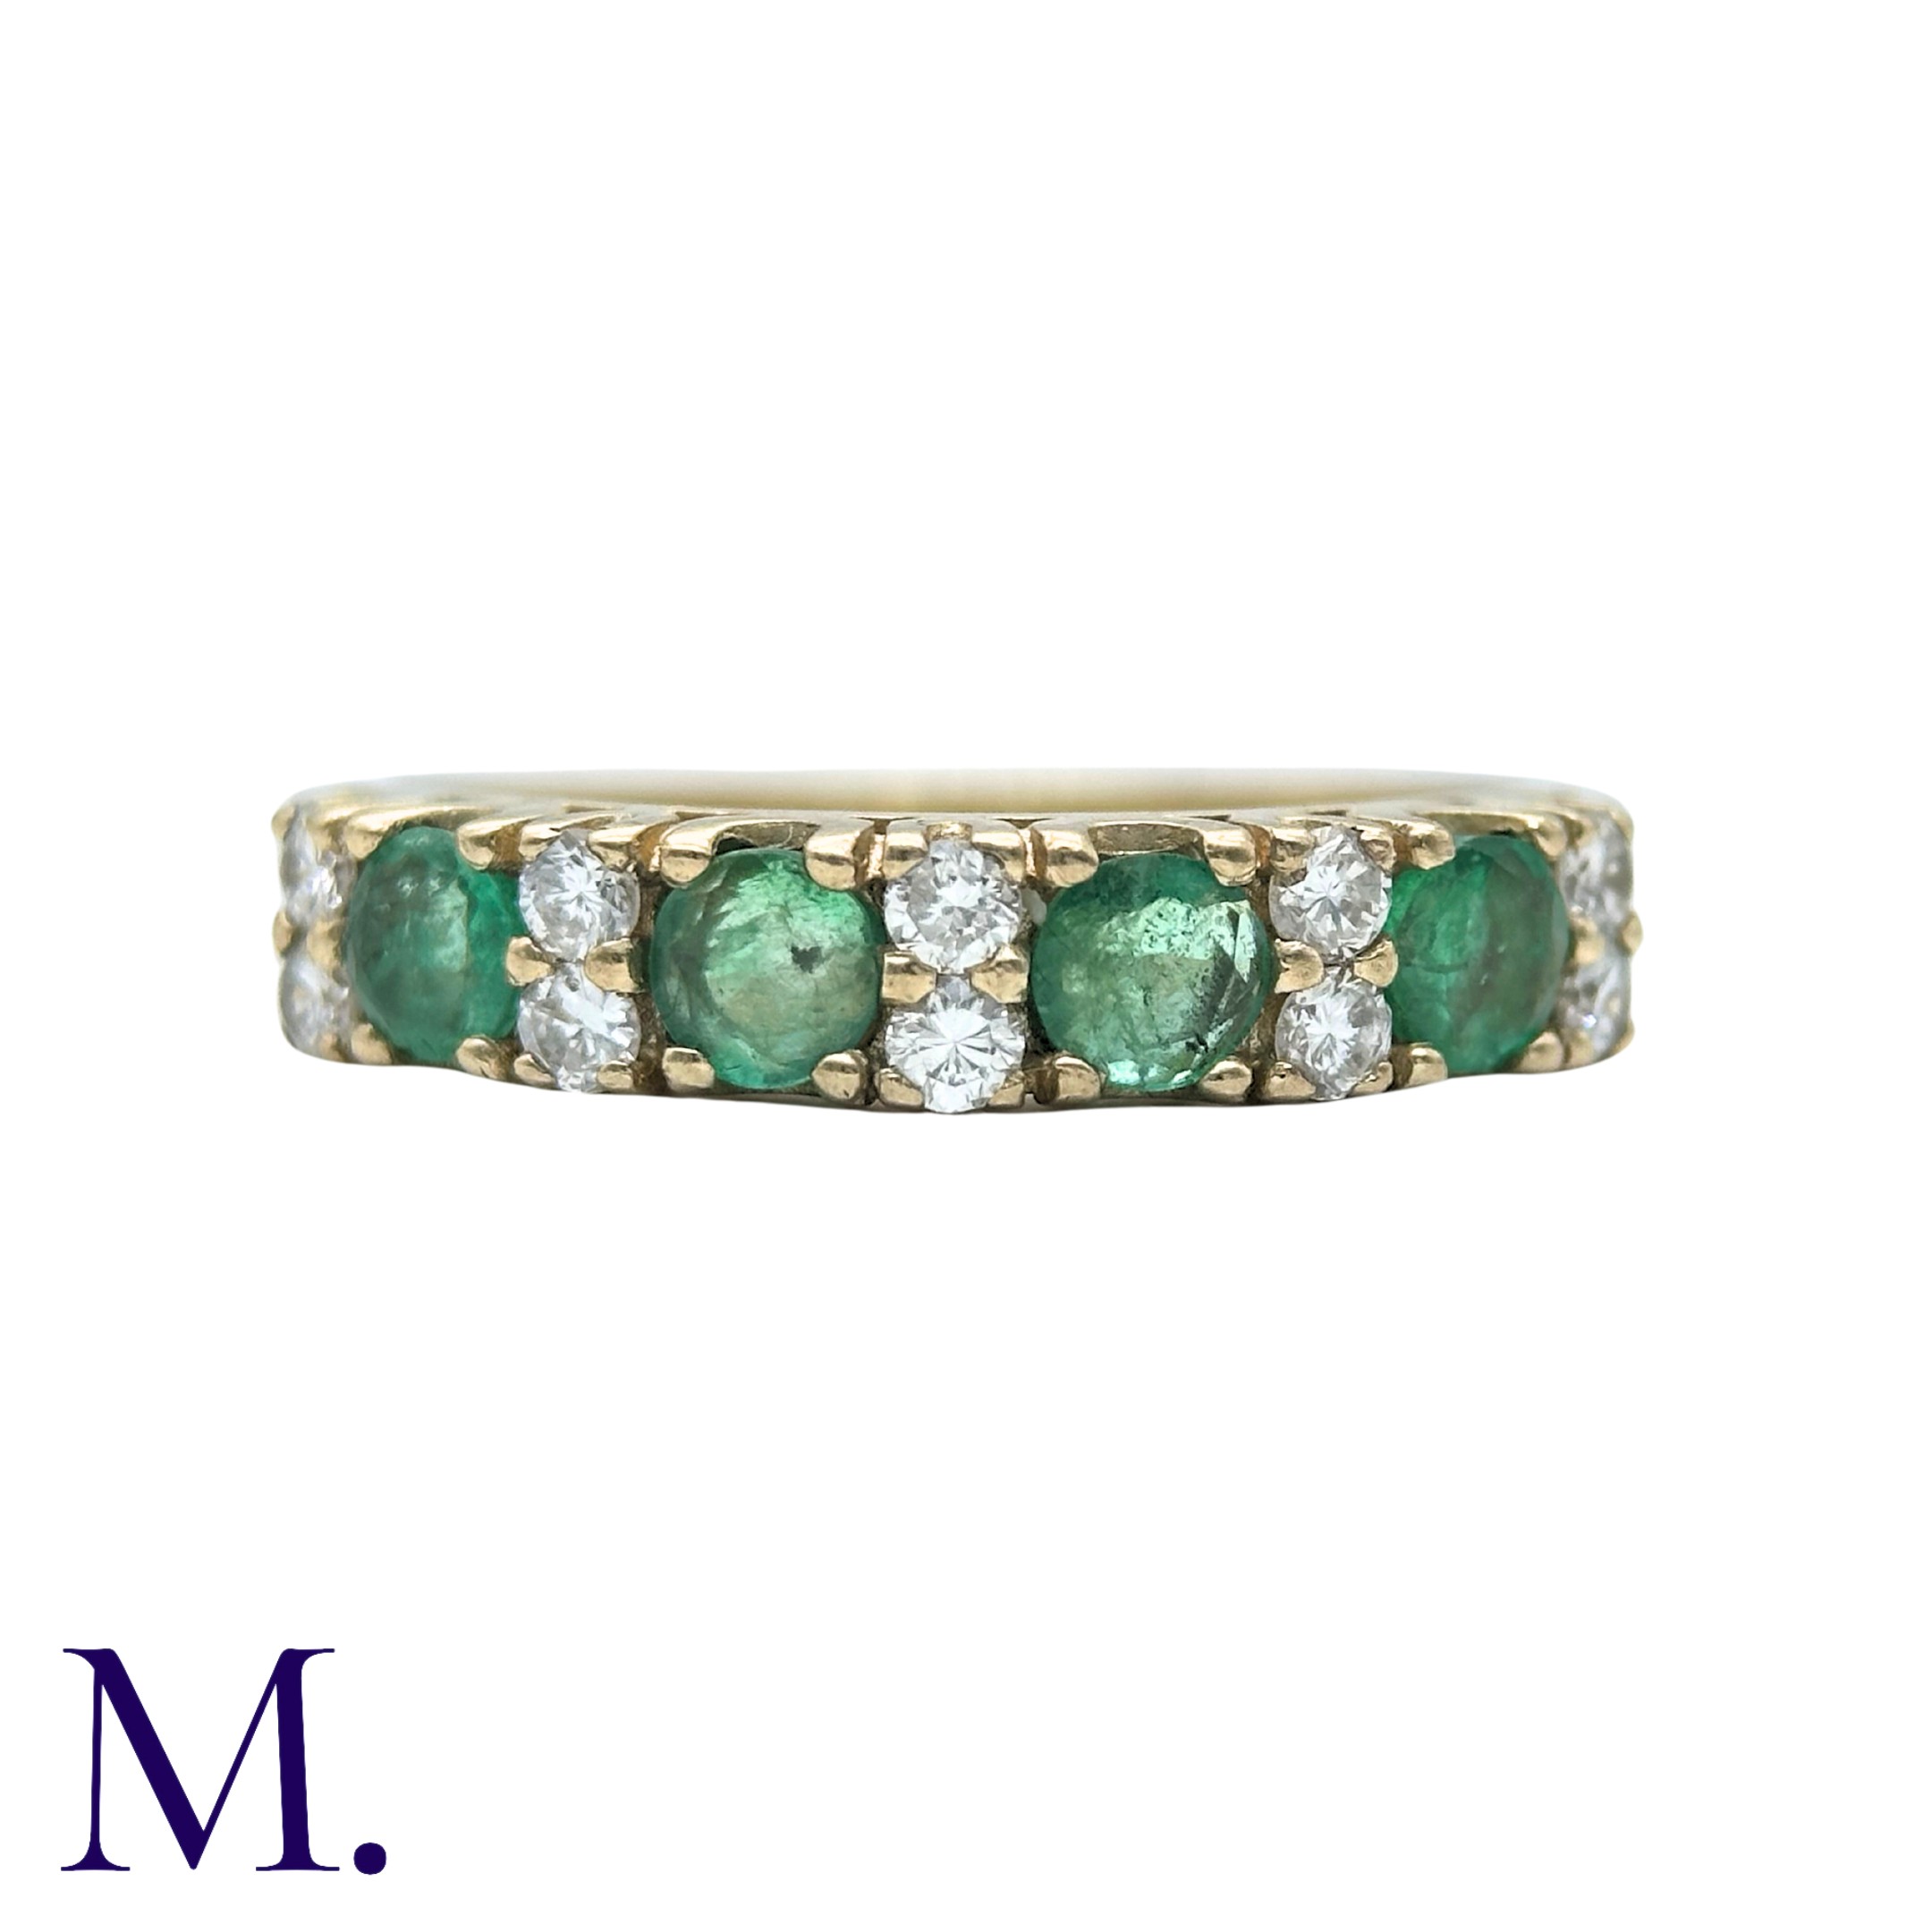 An Emerald And Diamond Ring in 9k yellow gold, set with four round cut emeralds punctuated with